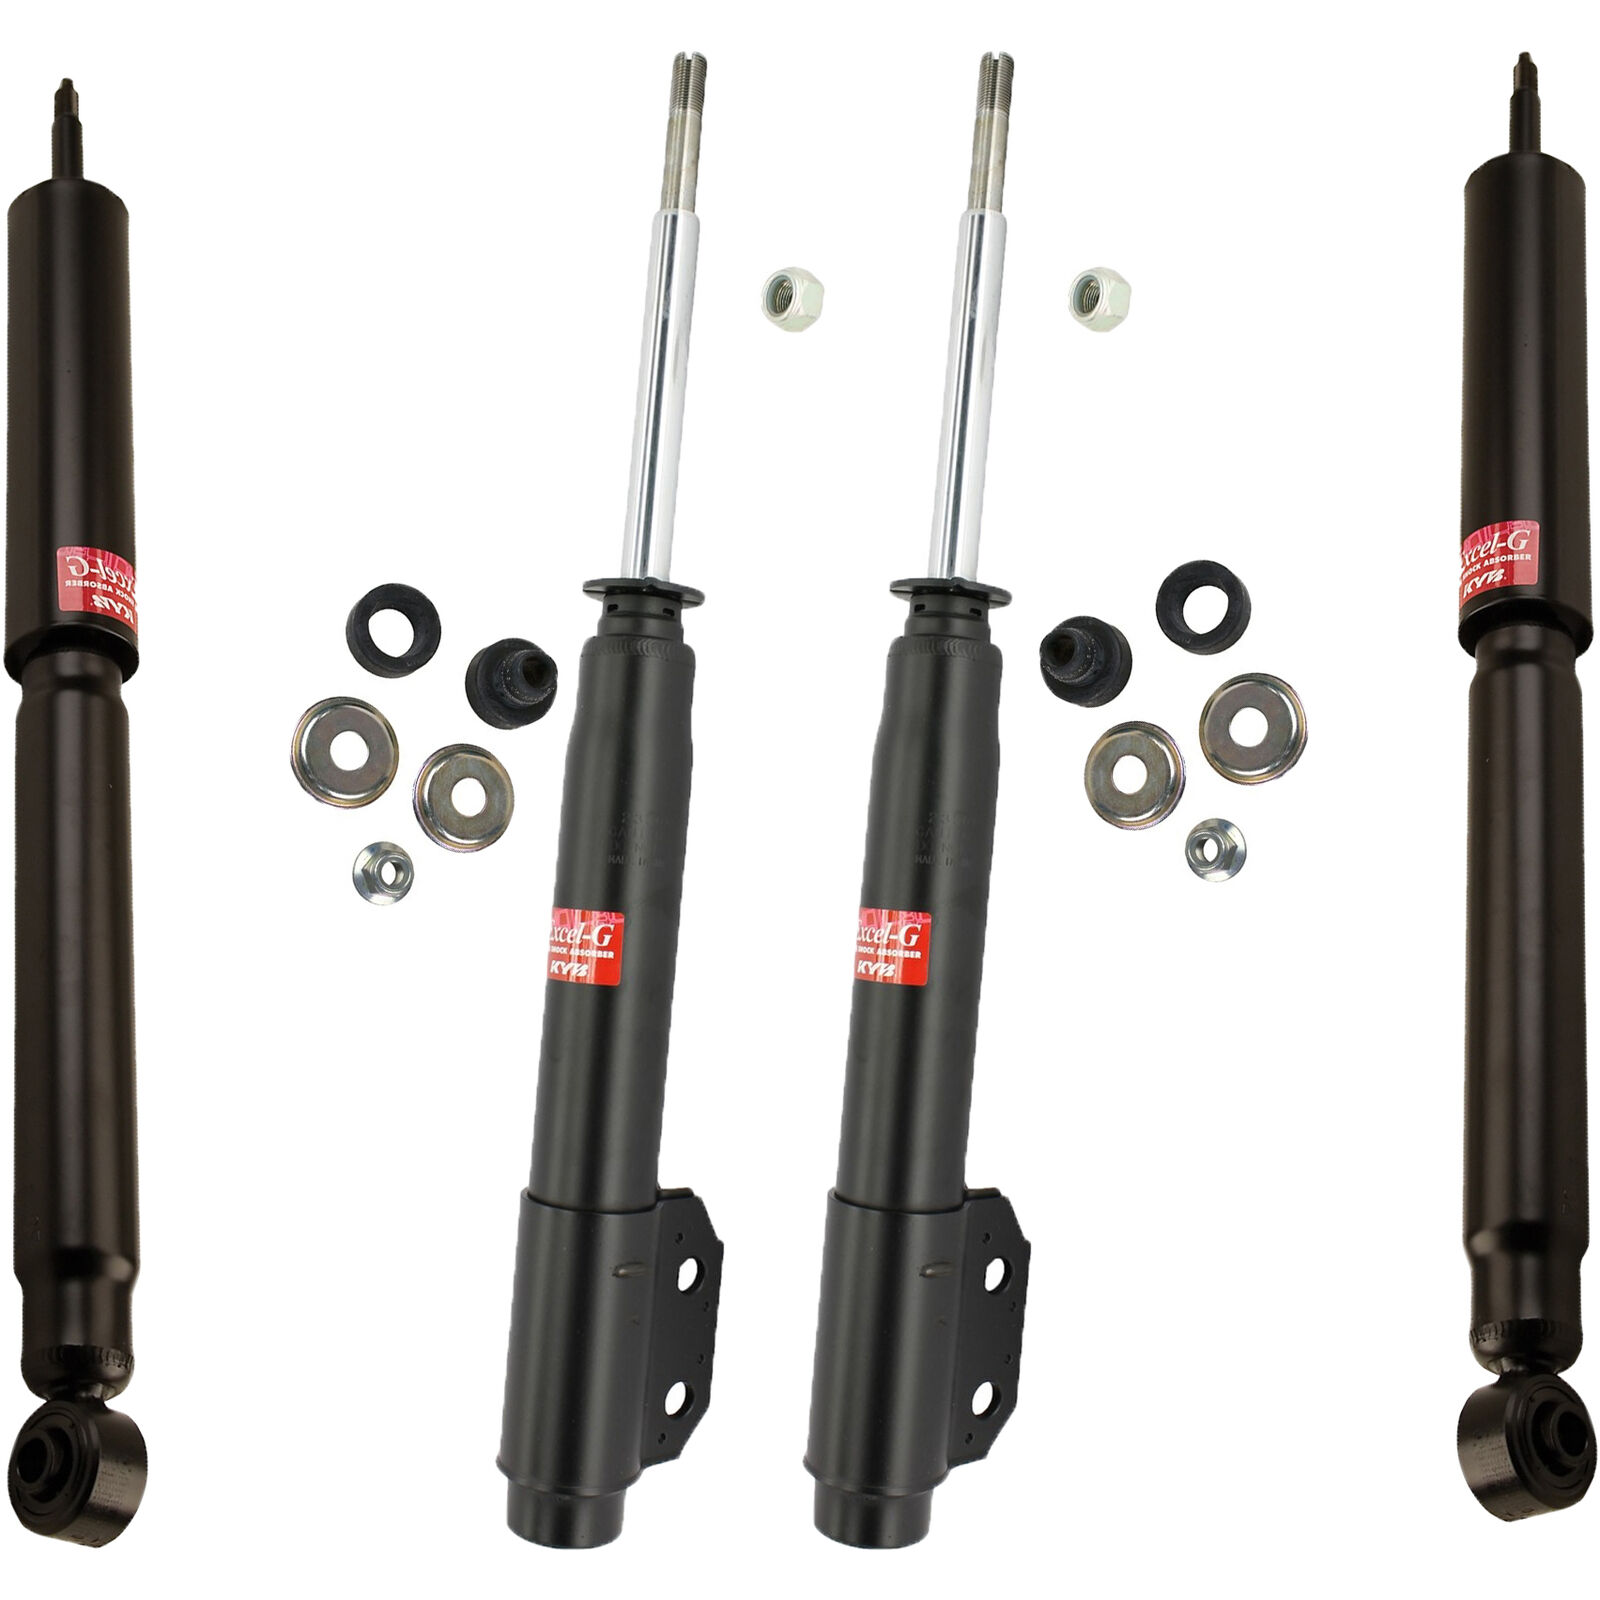 KYB Excel-G Front Struts Rear Shock Absorbers Kit Set 4PC For Ford MUSTANG 94-04